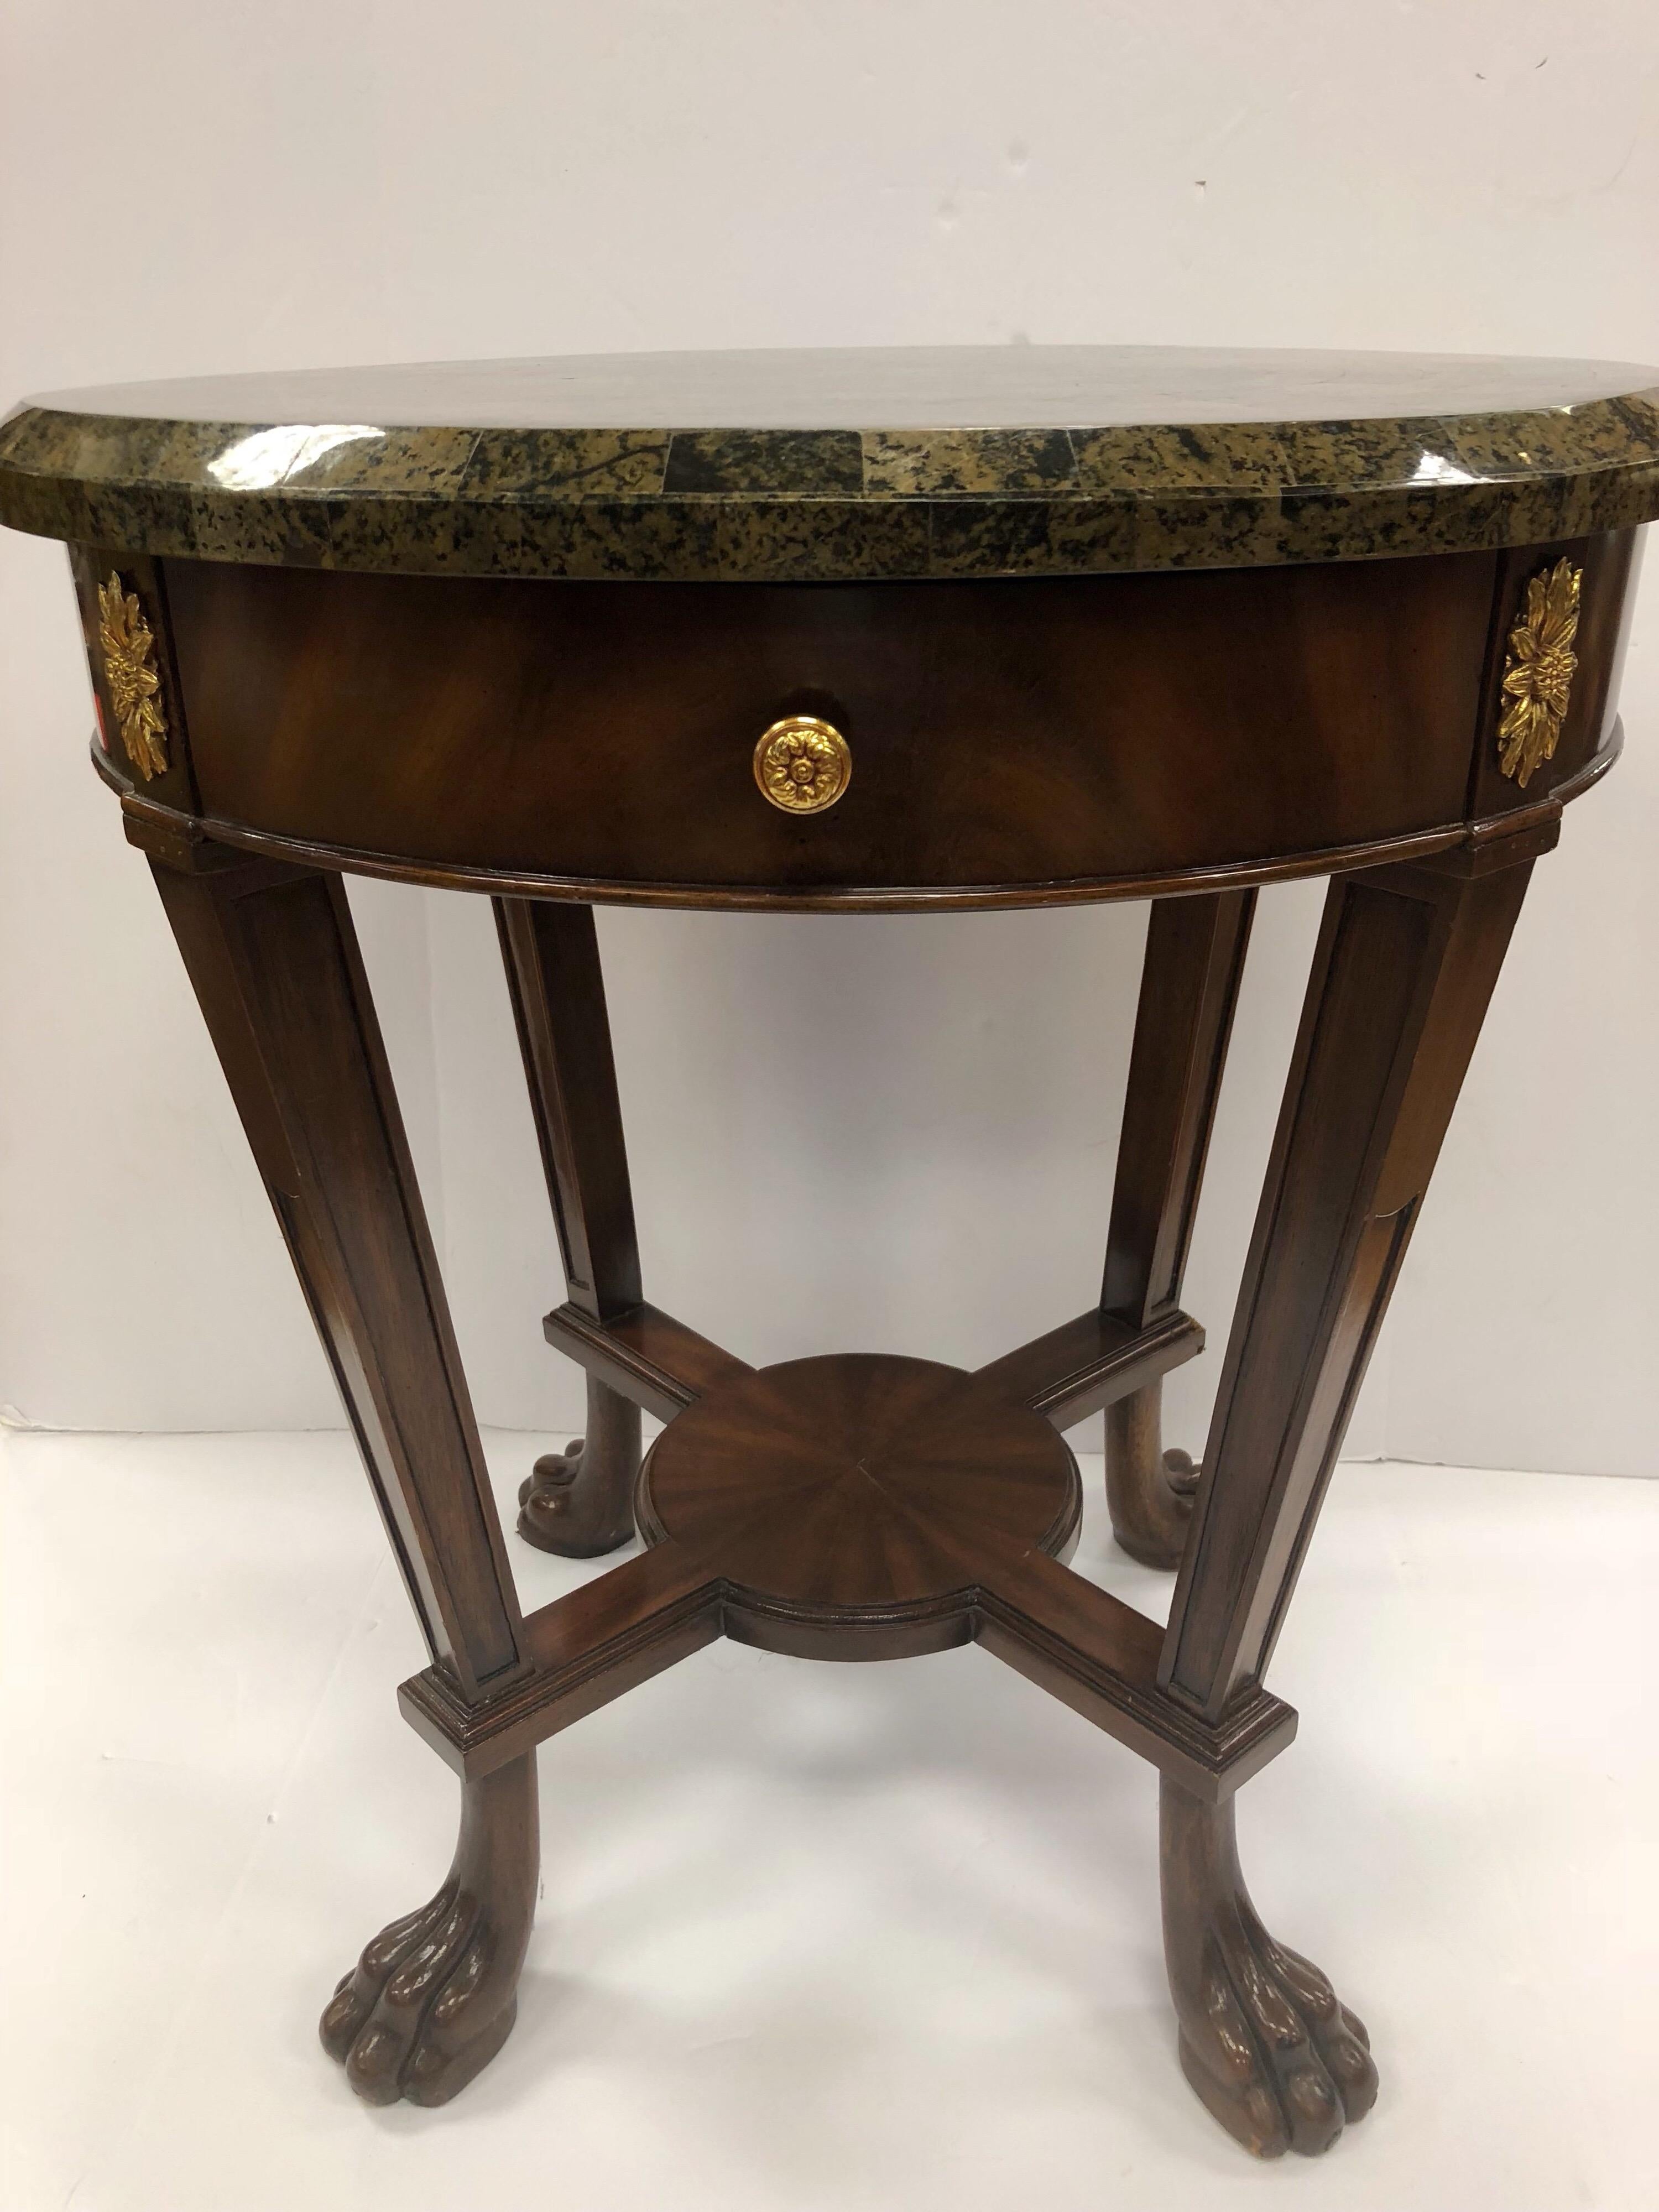 Signed mahogany and marble Maitland Smith round side/occasional table with top drawer for storage.
Marble is a olive and black color scheme and is accentuated by brass at sides.